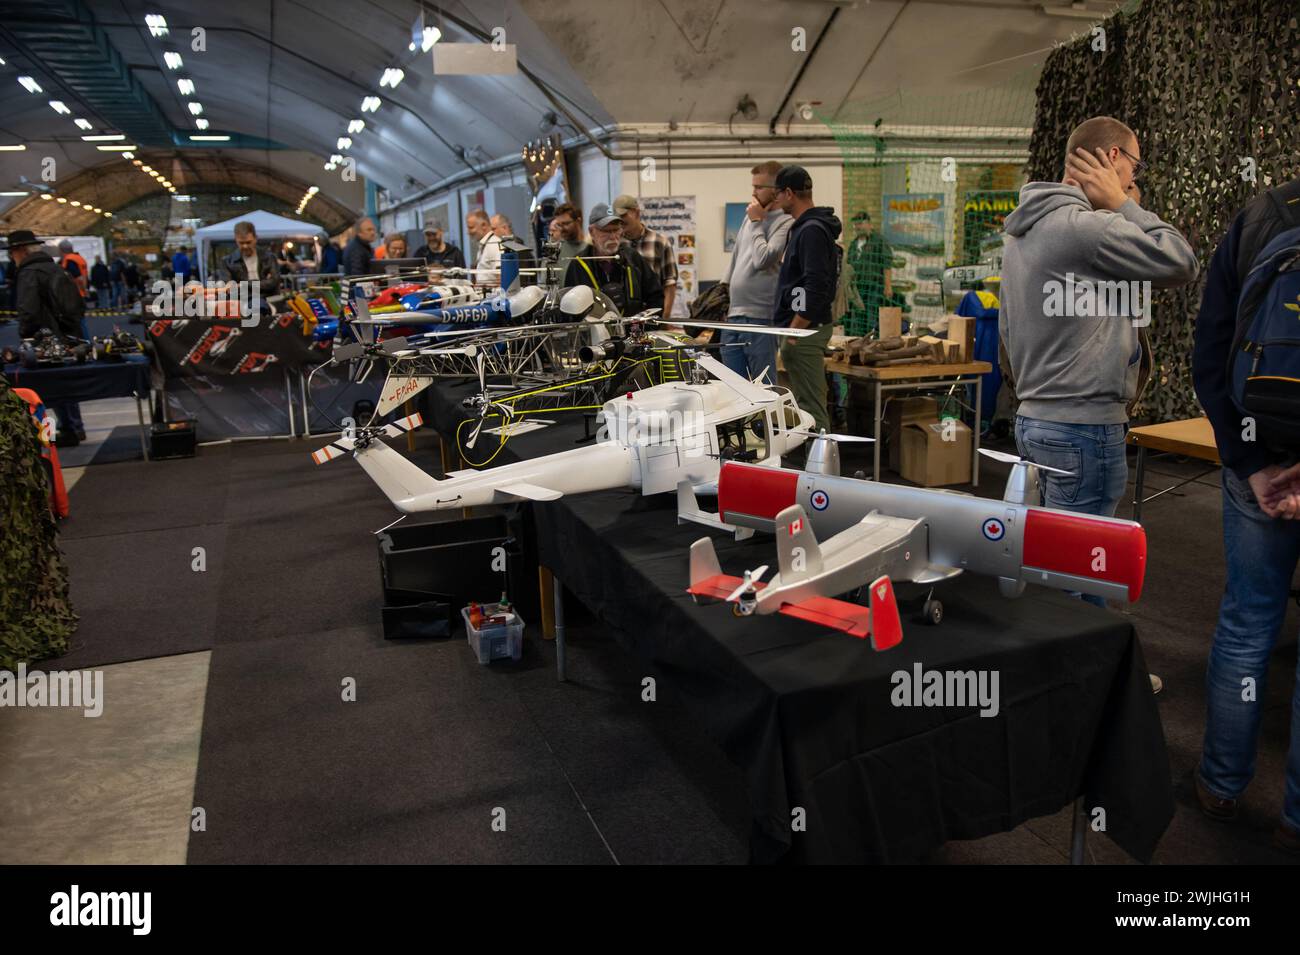 Gothenburg, Sweden - september 24 2022: Long row of radio controlled helicopters Stock Photo